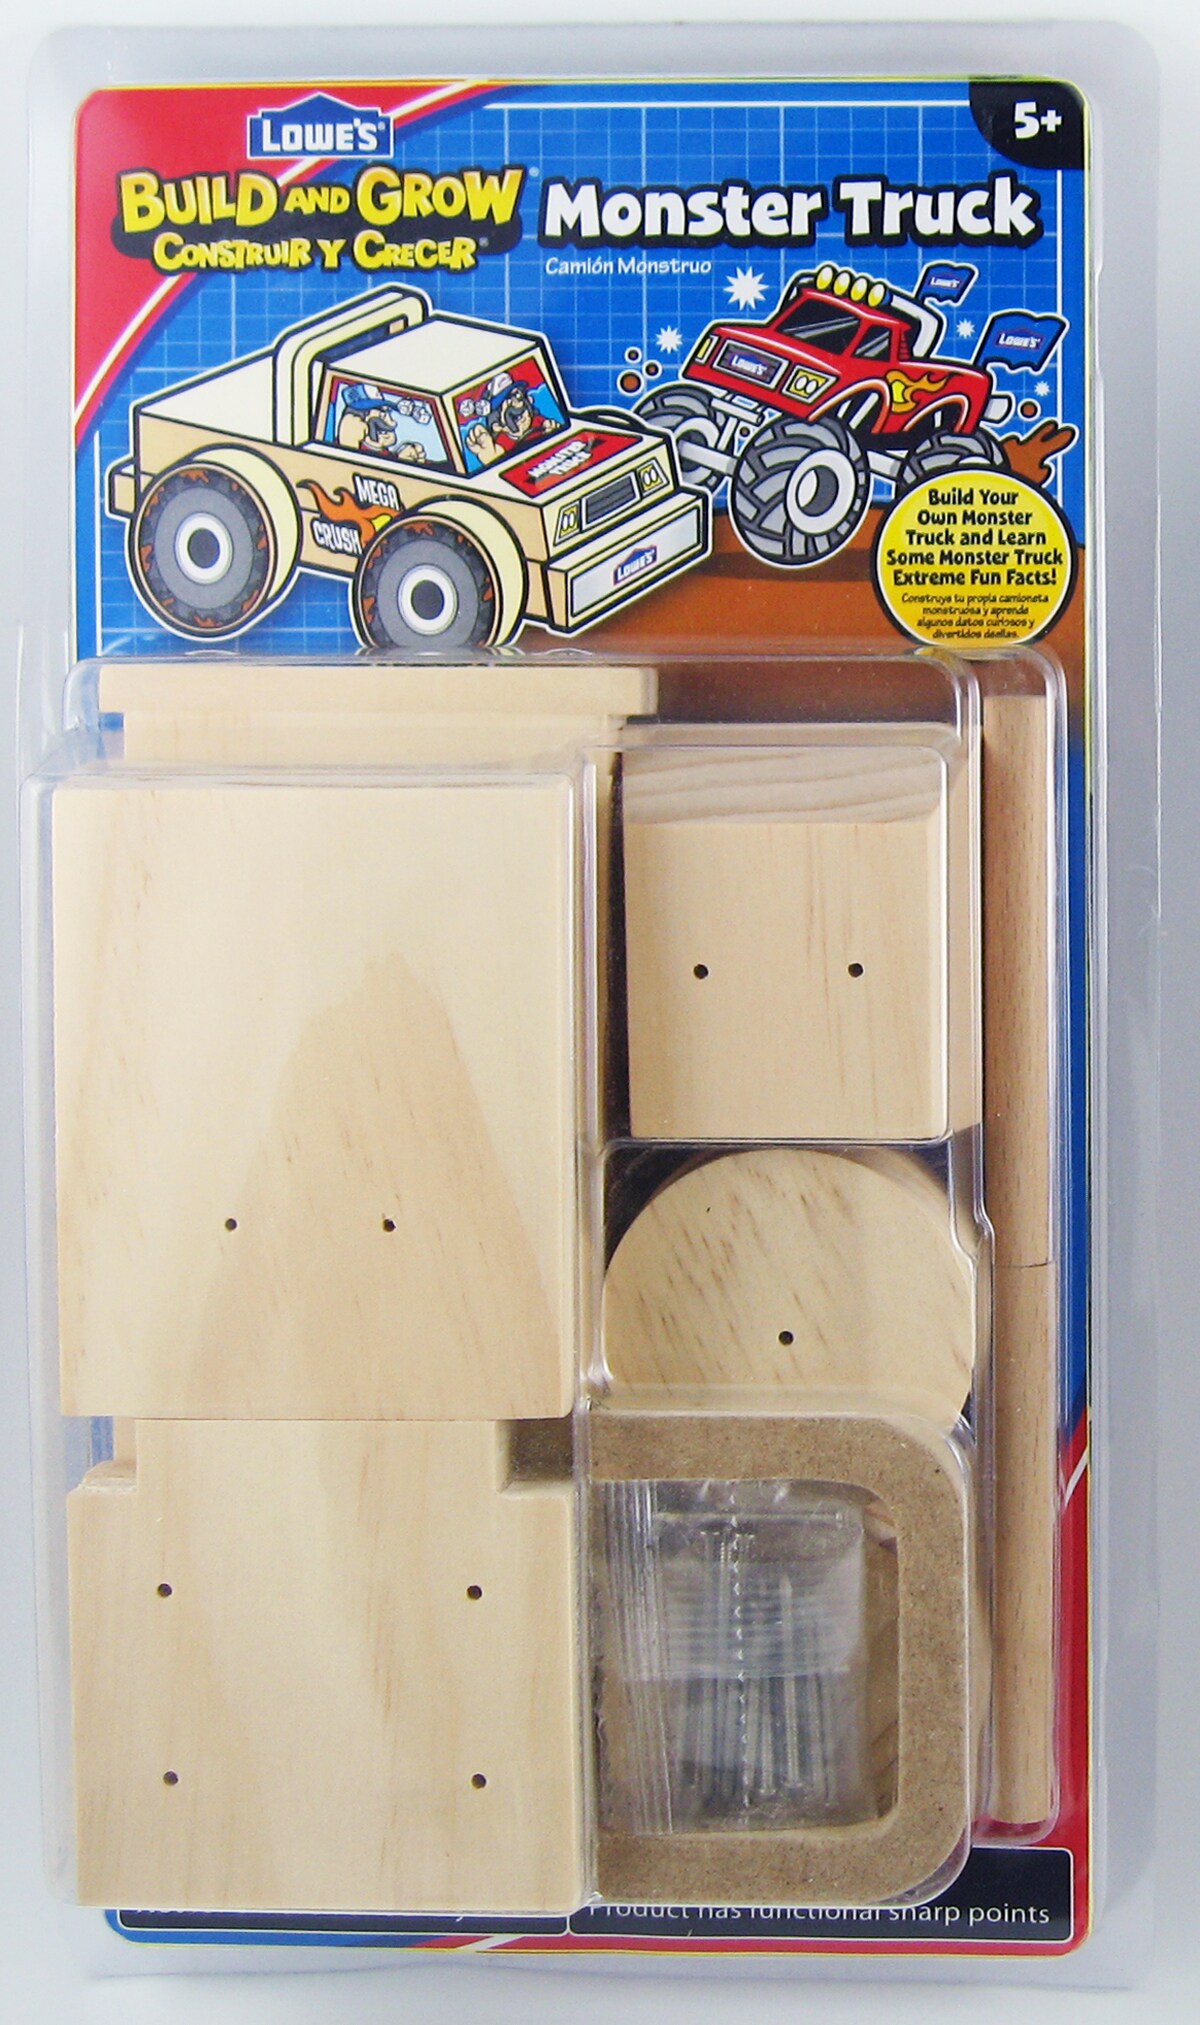 NEW HOME DEPOT KIDS WORKSHOP FIRE TRUCK KIT LOWES BUILD WOODEN PROJECT 